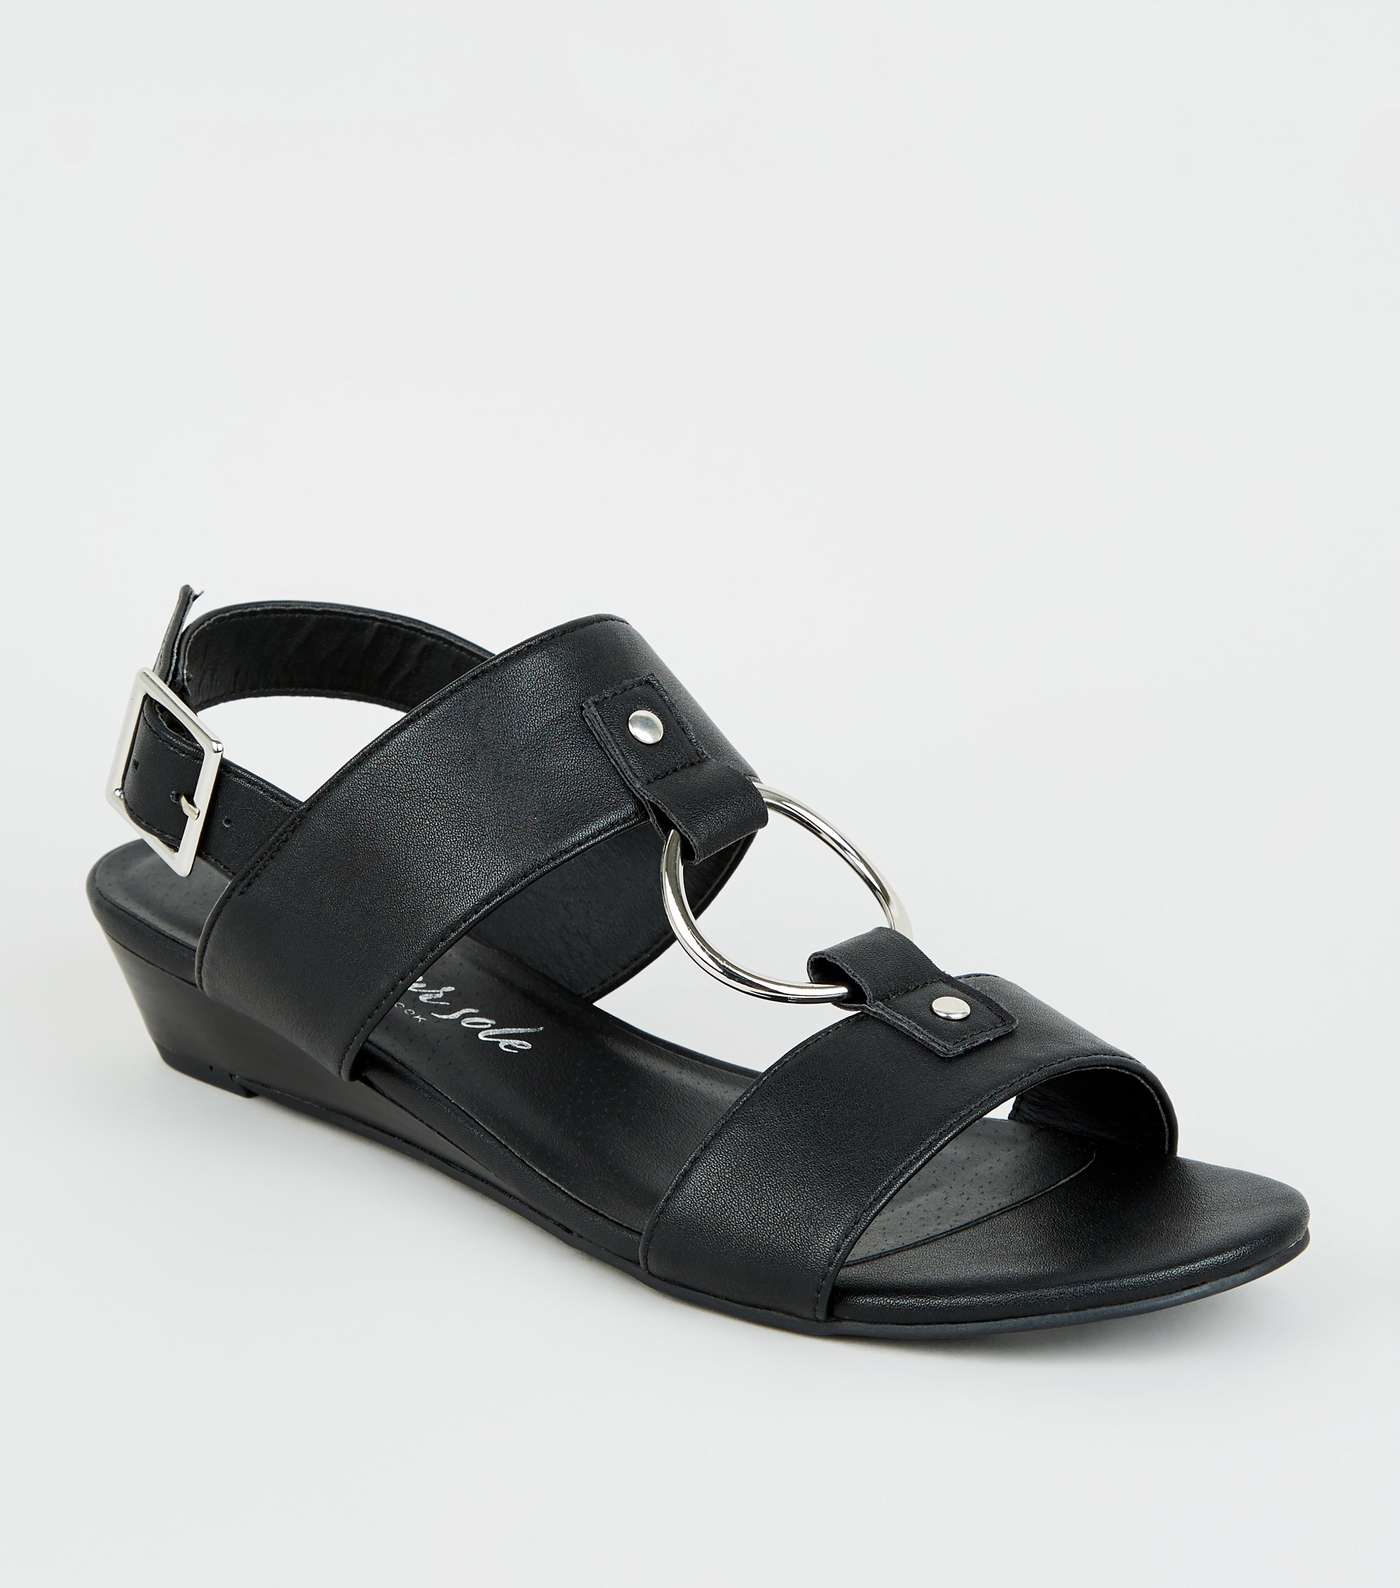 Black Leather-Look Ring Strap Wedge Sandals